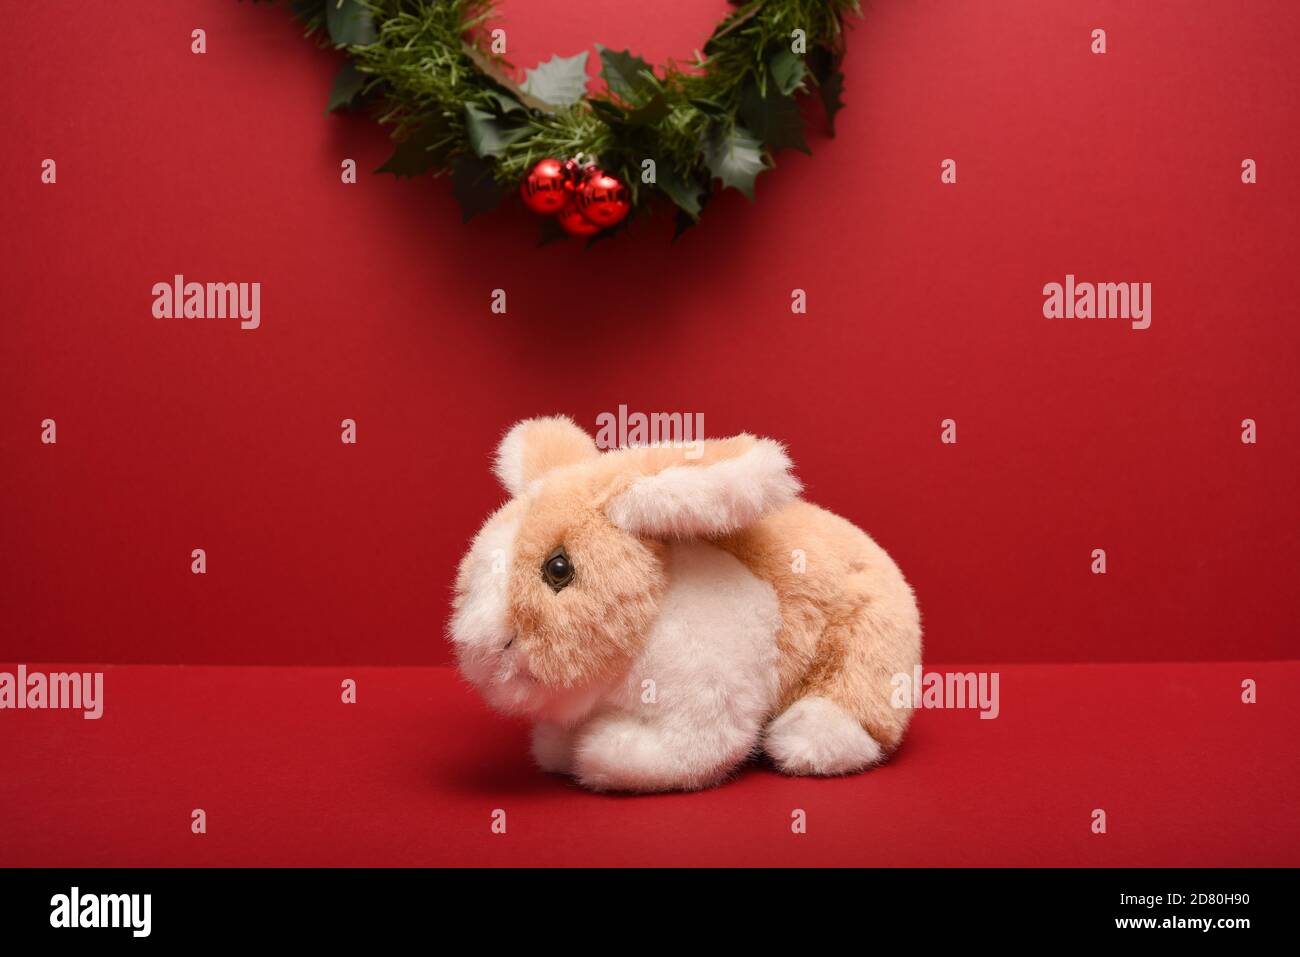 small stuffed toy rabbit isolated on a red background under a Christmas garland Stock Photo